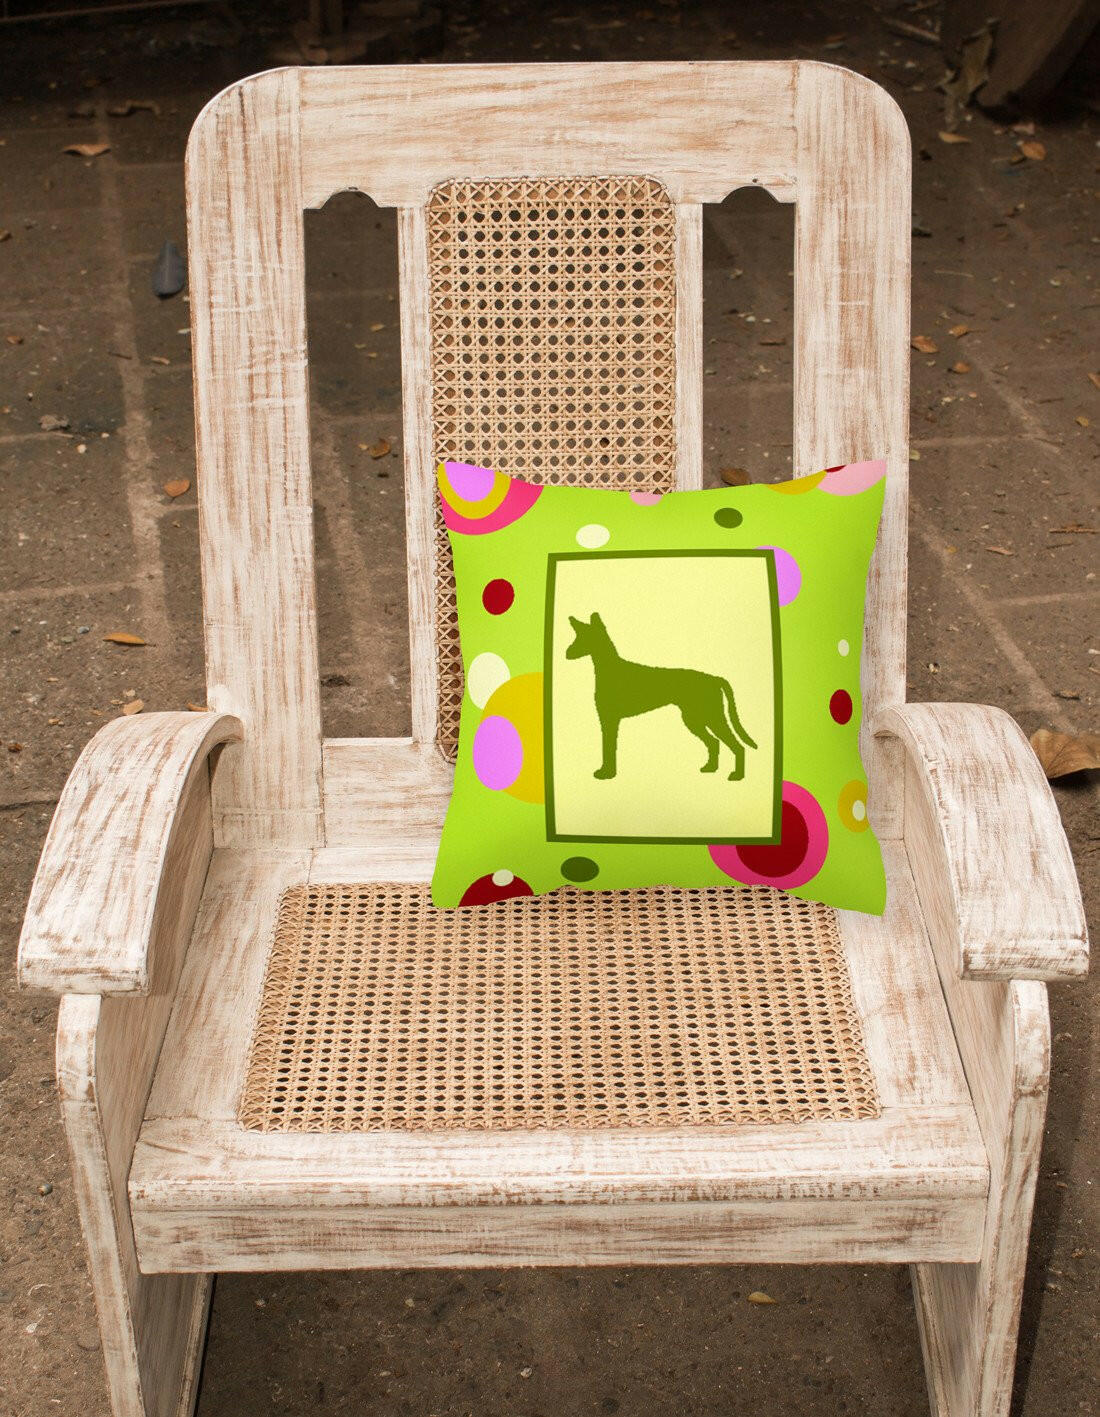 Lime Green Dots Ibizan Hound Fabric Decorative Pillow CK1134PW1414 by Caroline's Treasures